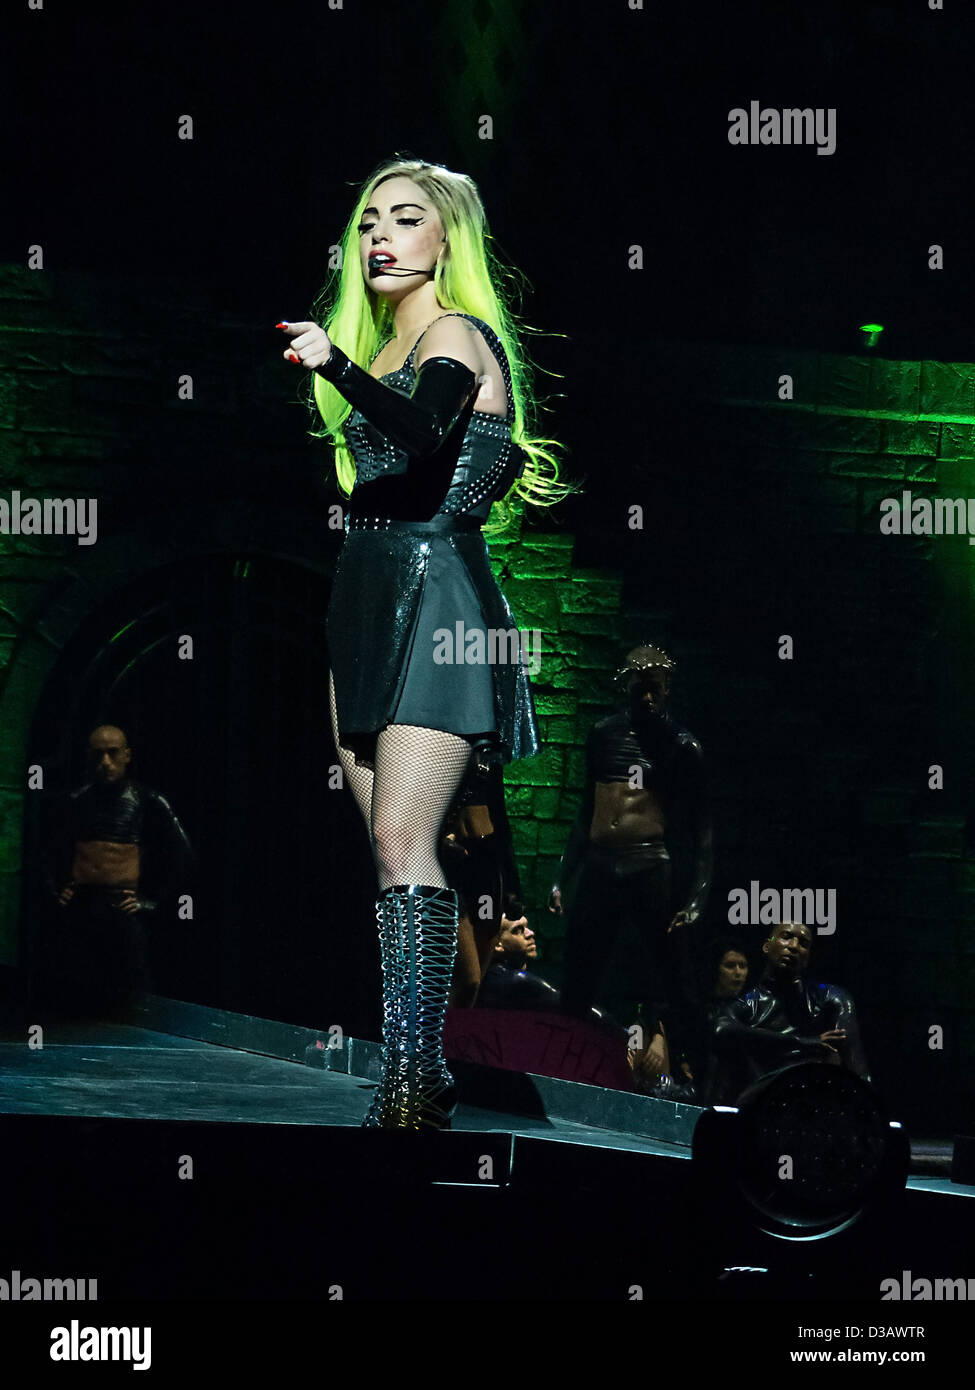 American singer Lady Gaga performs during her Born This Way Ball tour in Toronto, Ontario, Canada on Friday February 8, 2013. Stock Photo